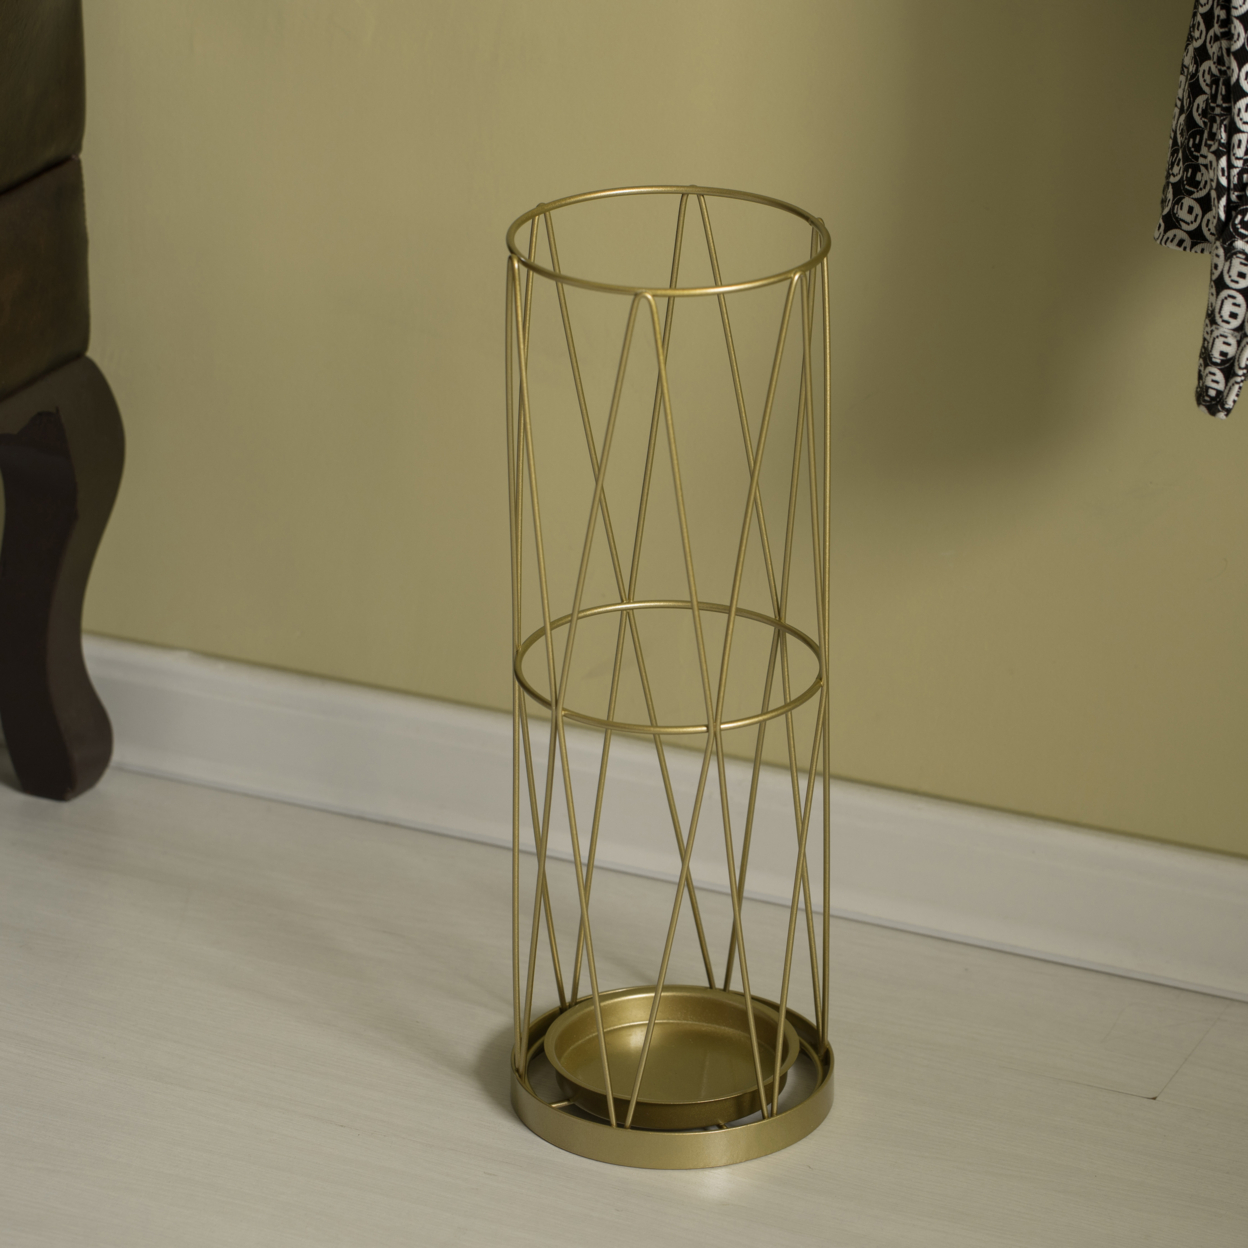 Gold Round Vertical Design Umbrella Holder Stand For Indoor And Outdoor With Drip Water Tray